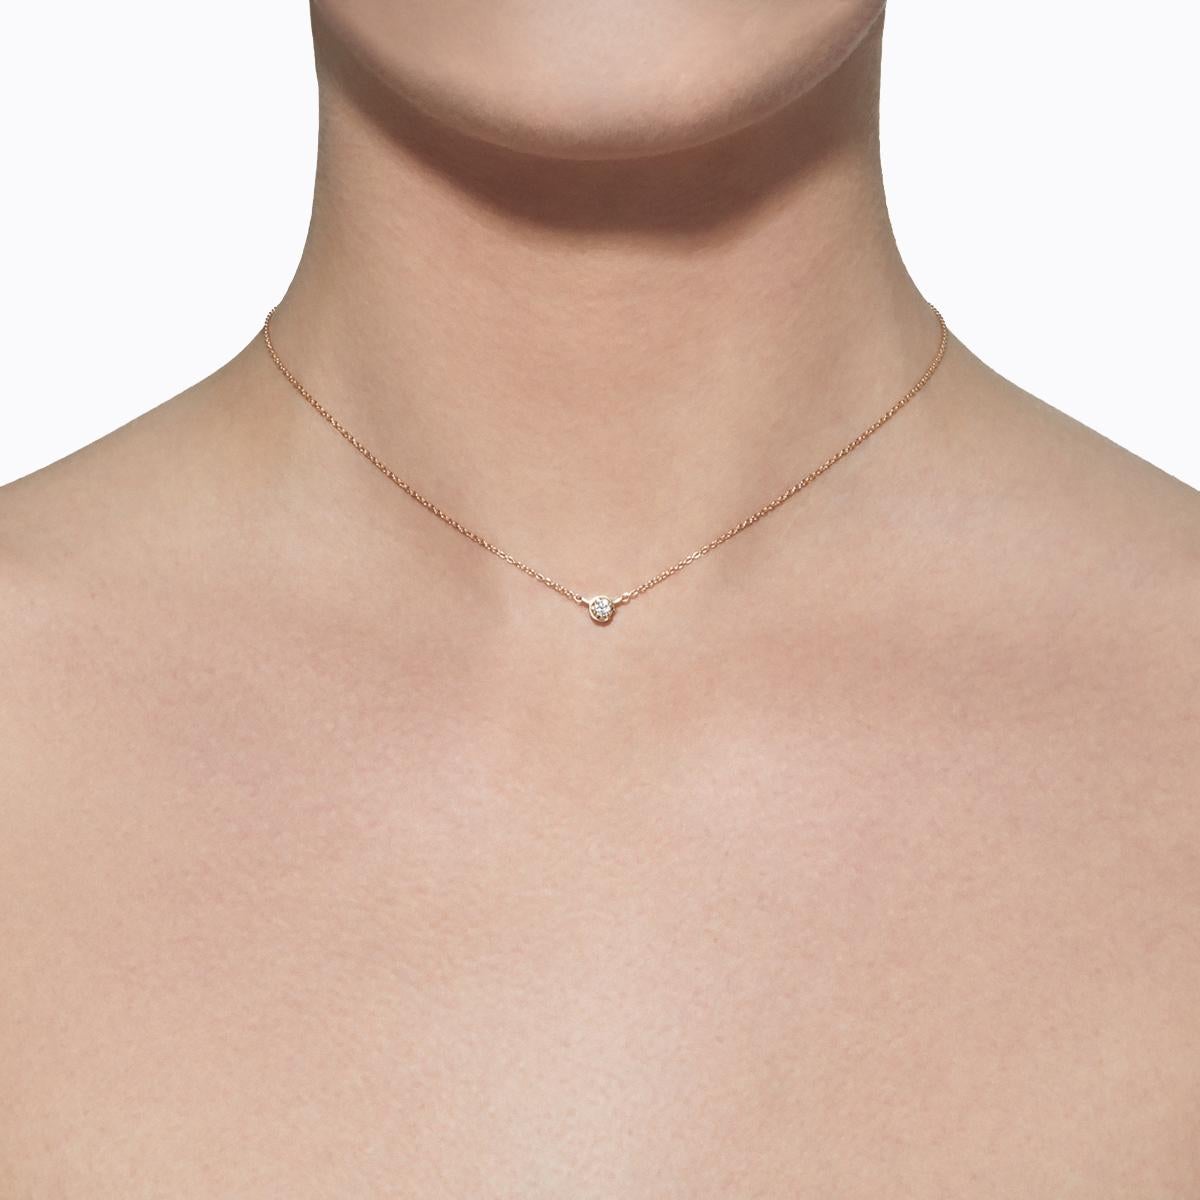 A single stone diamond necklace. Unlike traditional chain and pendant necklaces with a separate clasp, the diamond setting itself doubles as a hidden clasp, ensuring the stone is always featured in the front. Turn it horizontally 45 degrees to open